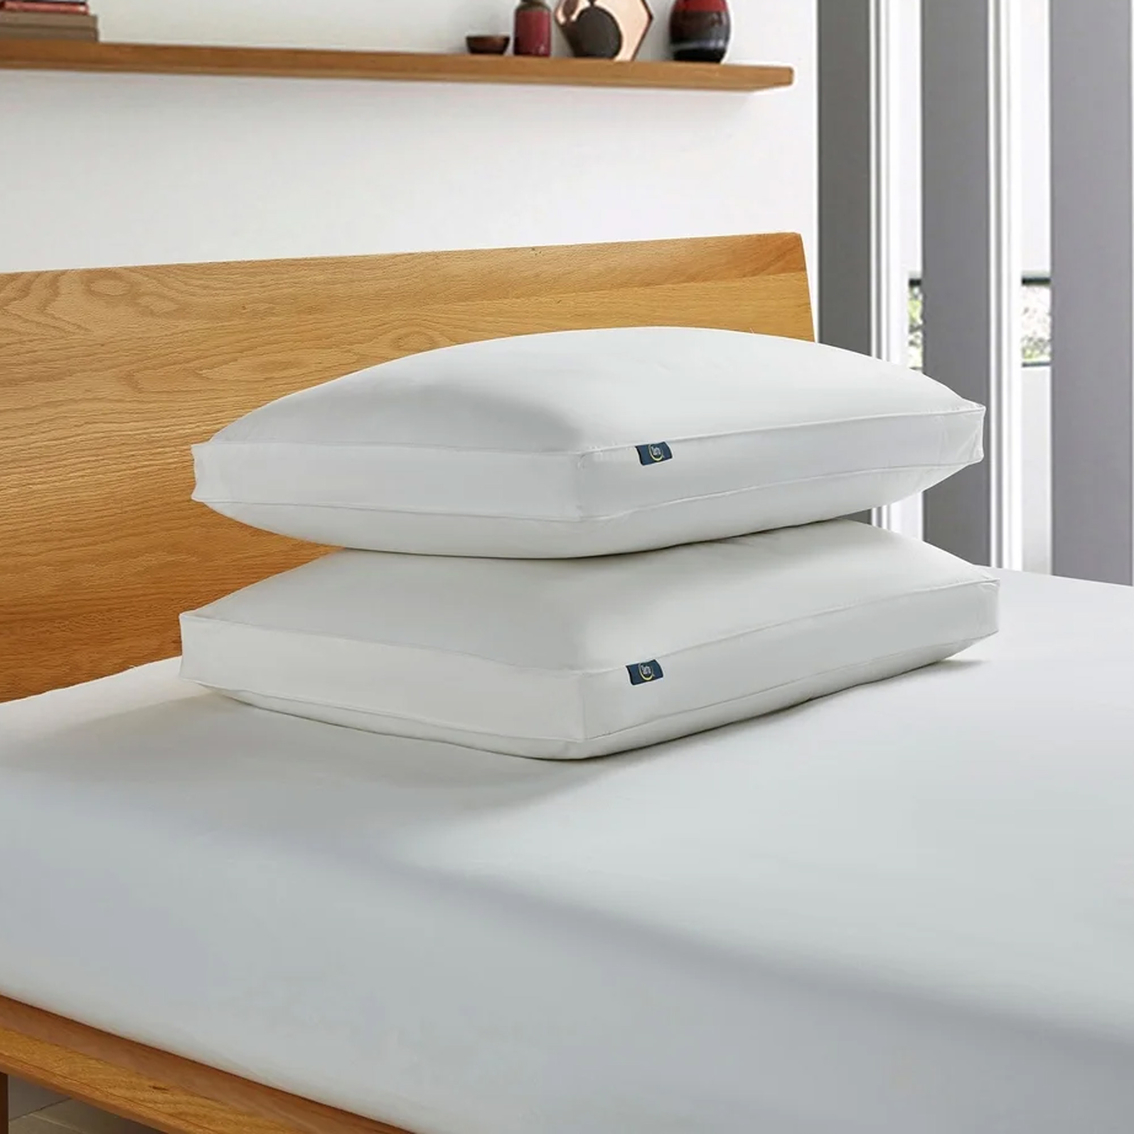 Serta White Goose Feather and Down Fiber Side Sleeper Pillow, 2 pk. - Image 2 of 3